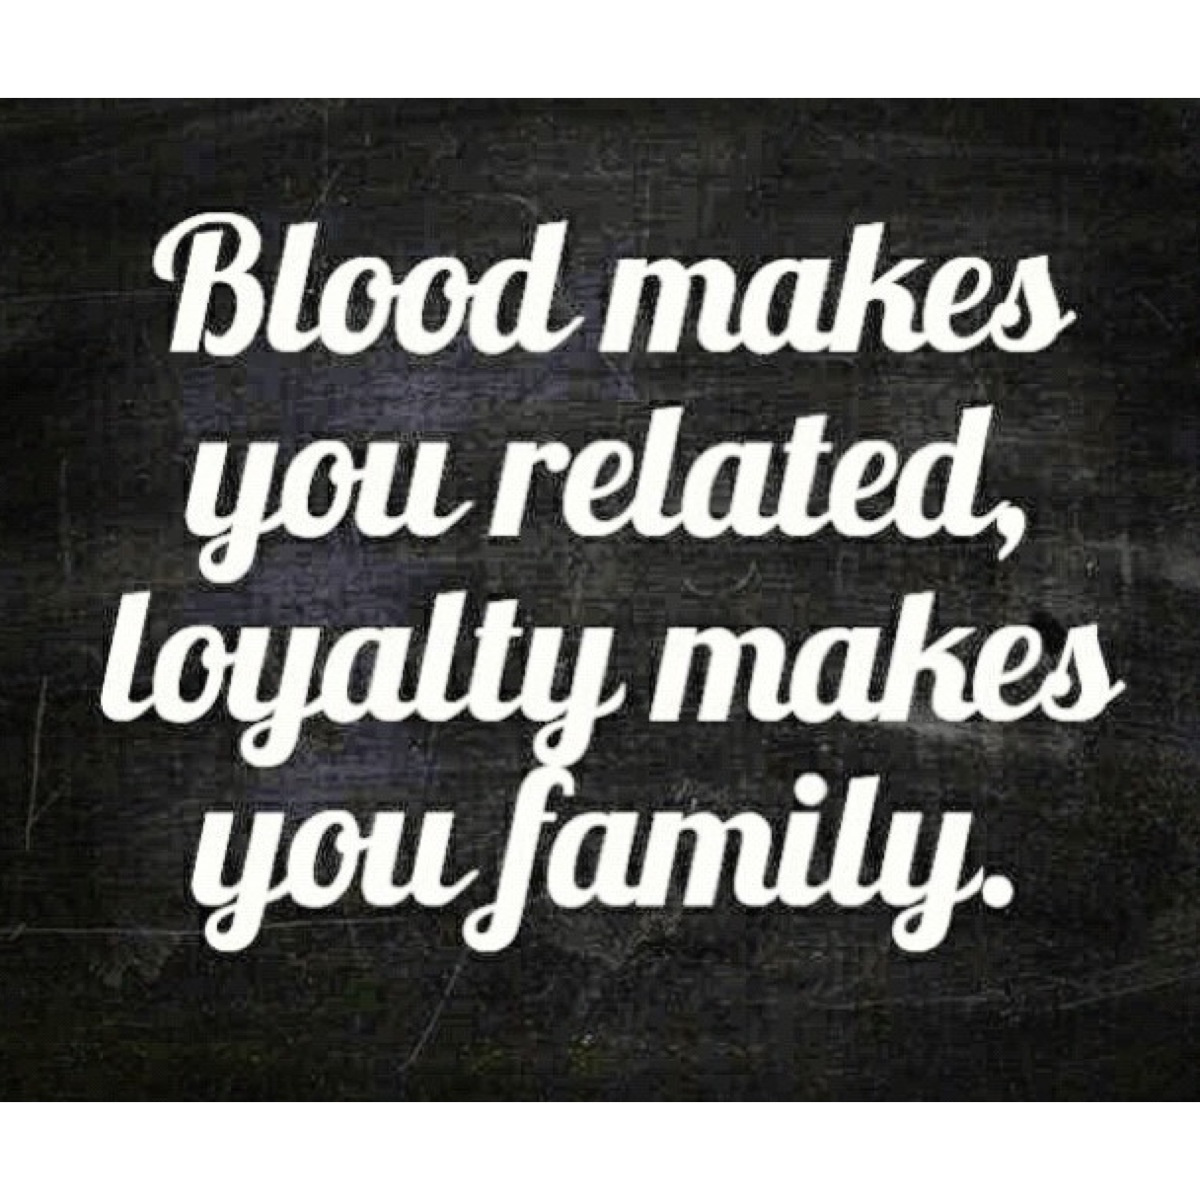 Family Loyalty Quotes in the year 2023 Learn more here | quotesenglish5